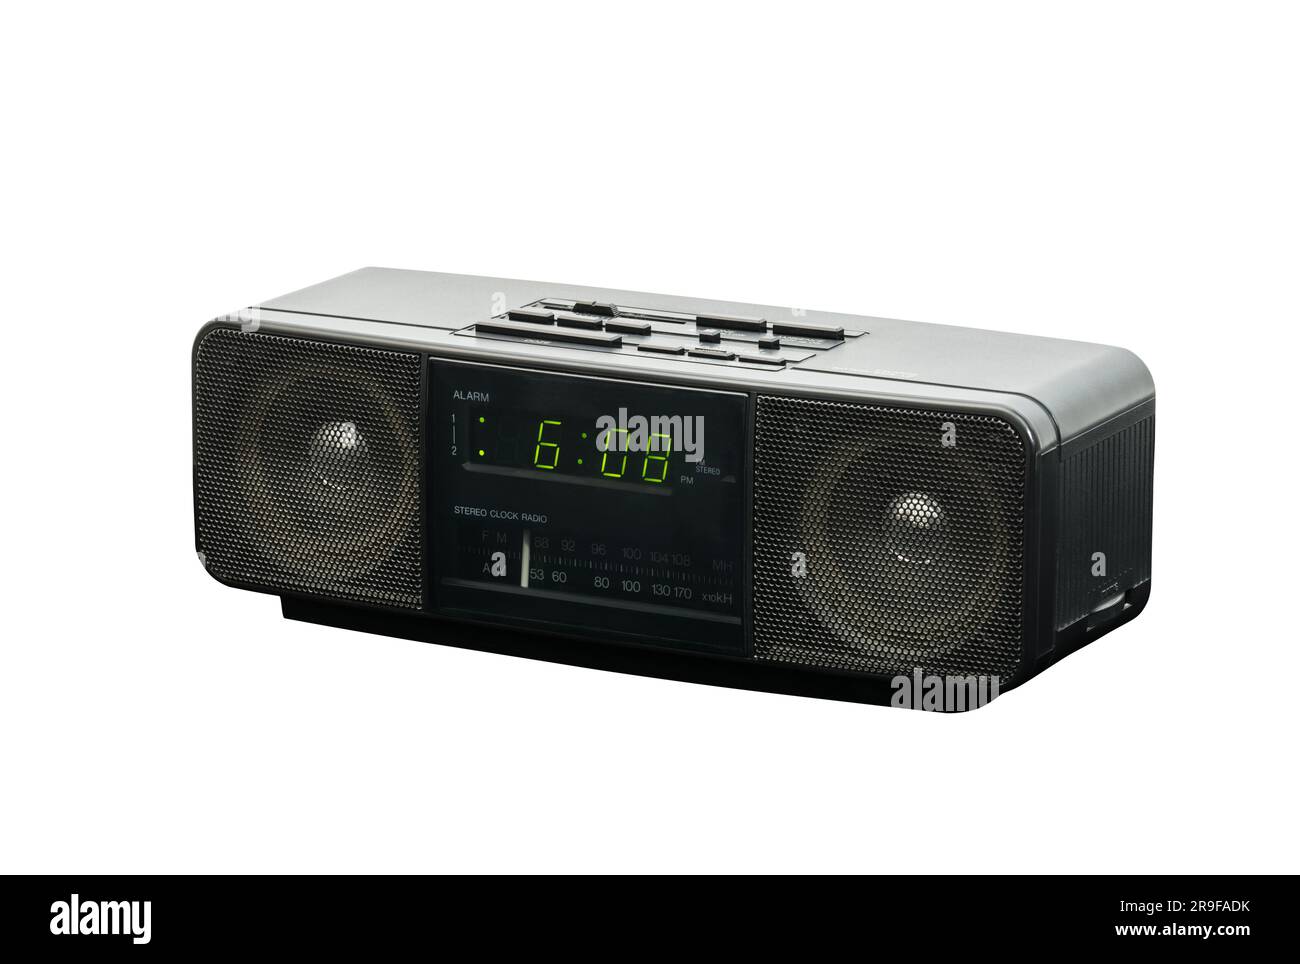 Old stereo alarm clock radio isolated with cut out background. Stock Photo